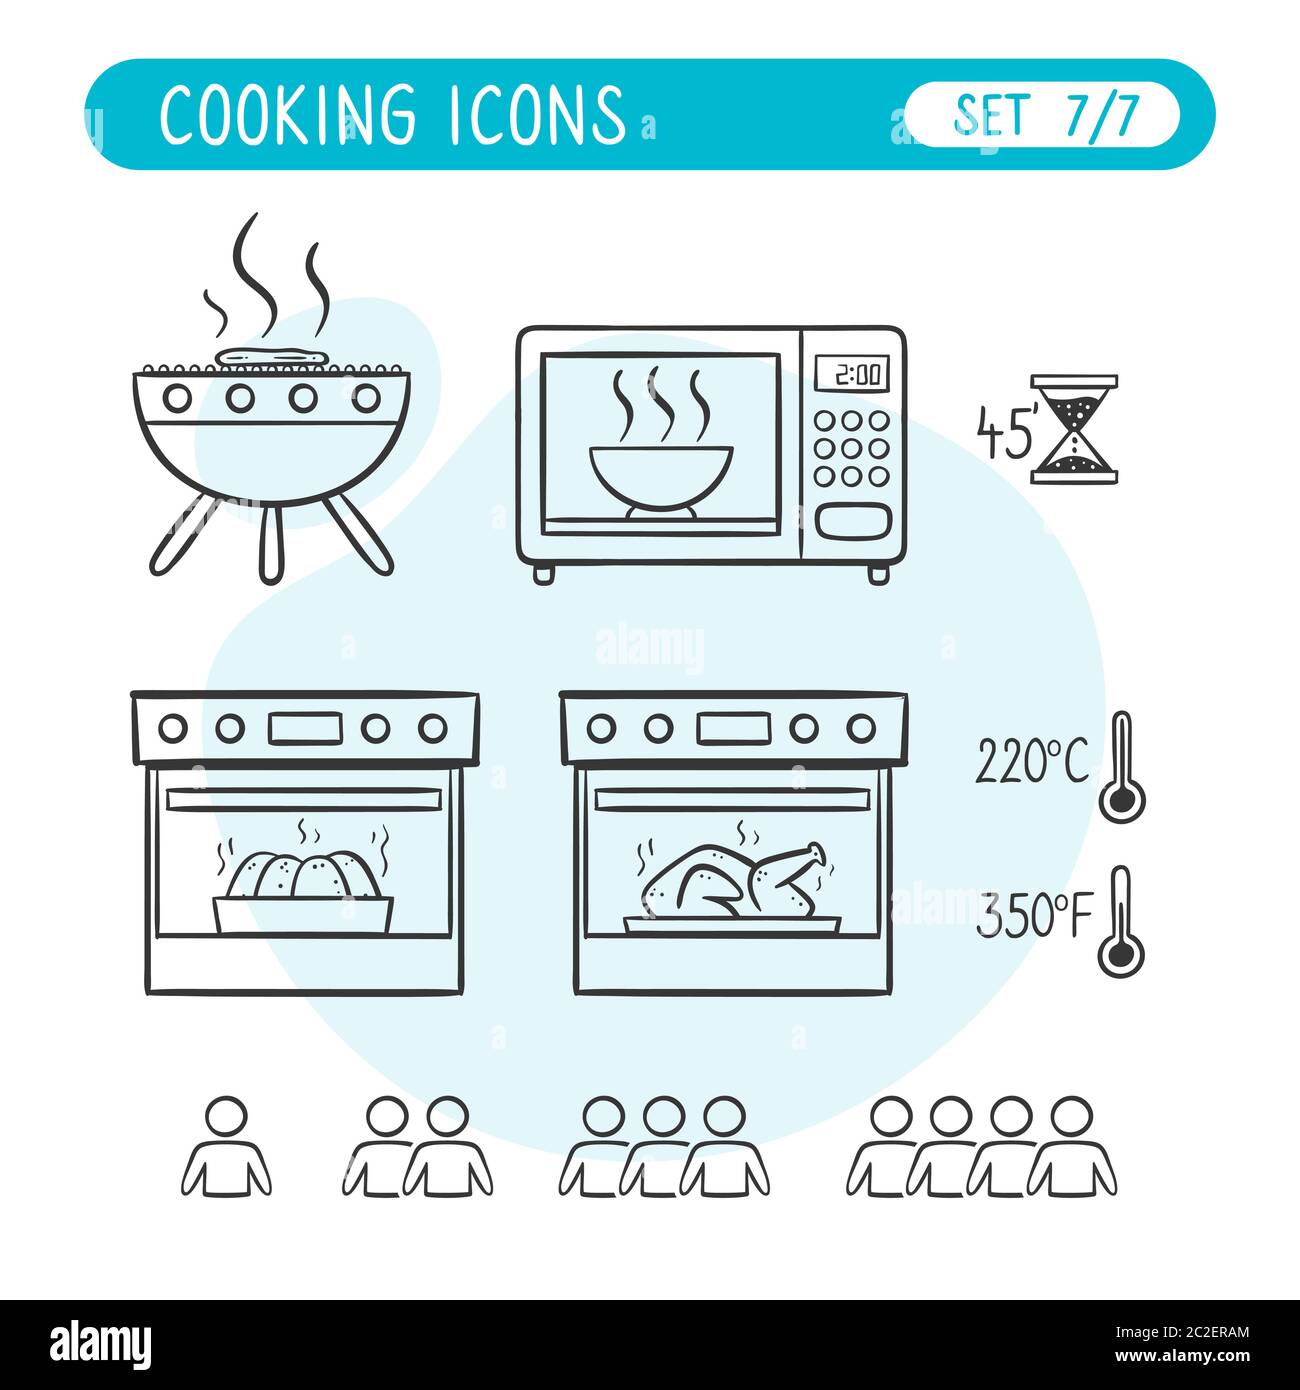 Cooking instructions icon set. Very useful to explain cooking recipes. Doodle style. Seventh part of seven images full collection. Stock Vector